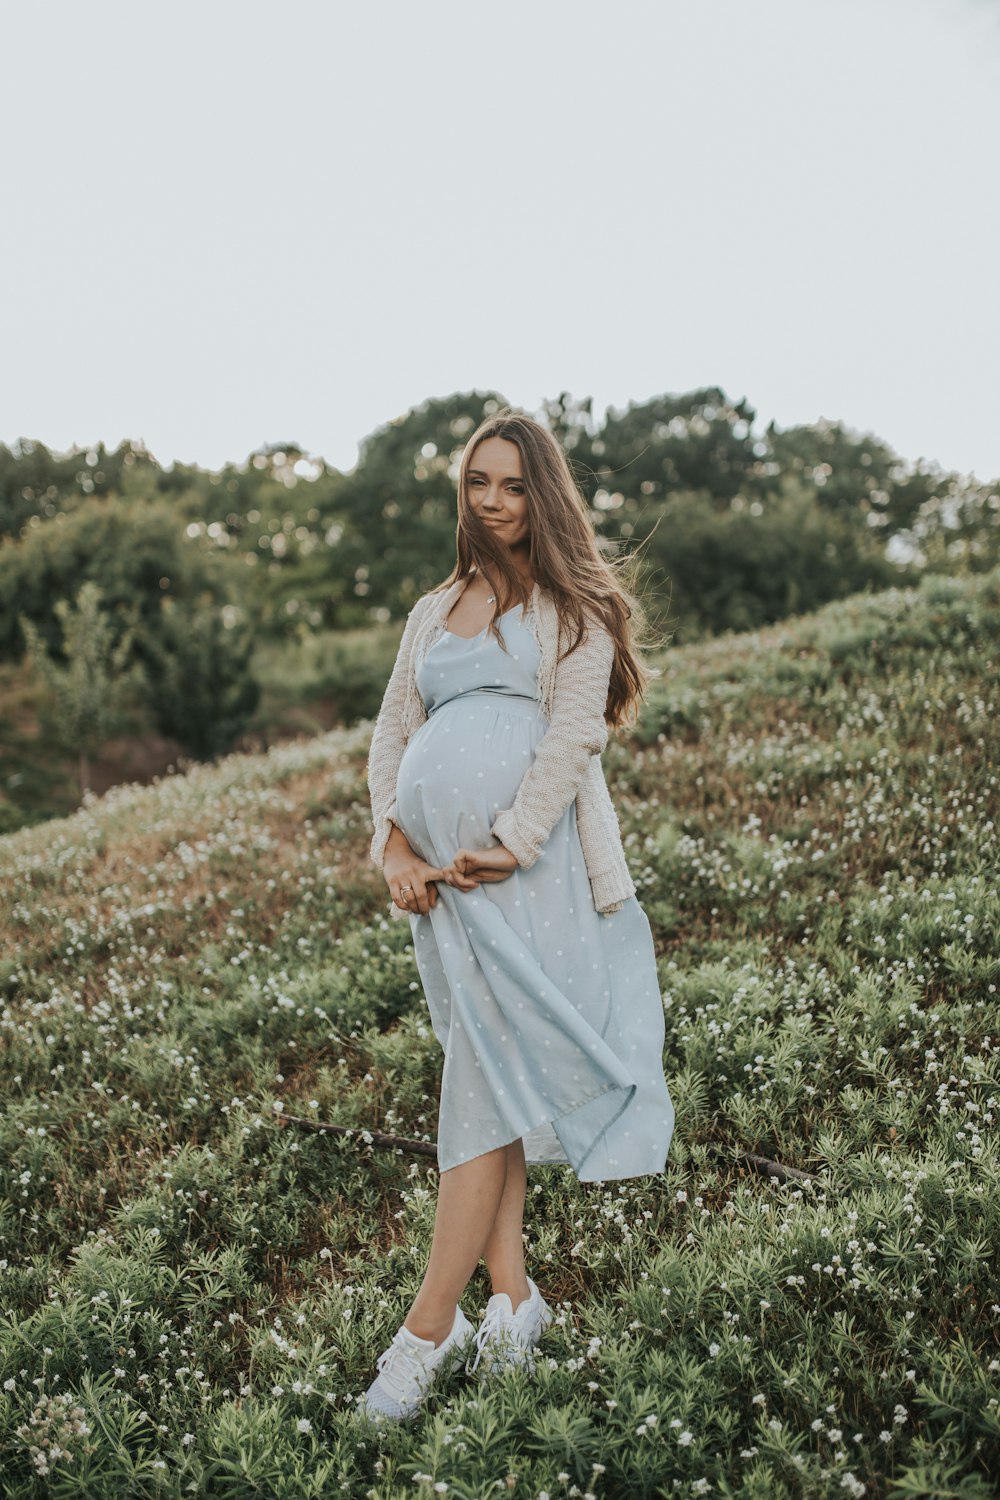 pregnant woman wearing gray dress standing on green grass during daytime